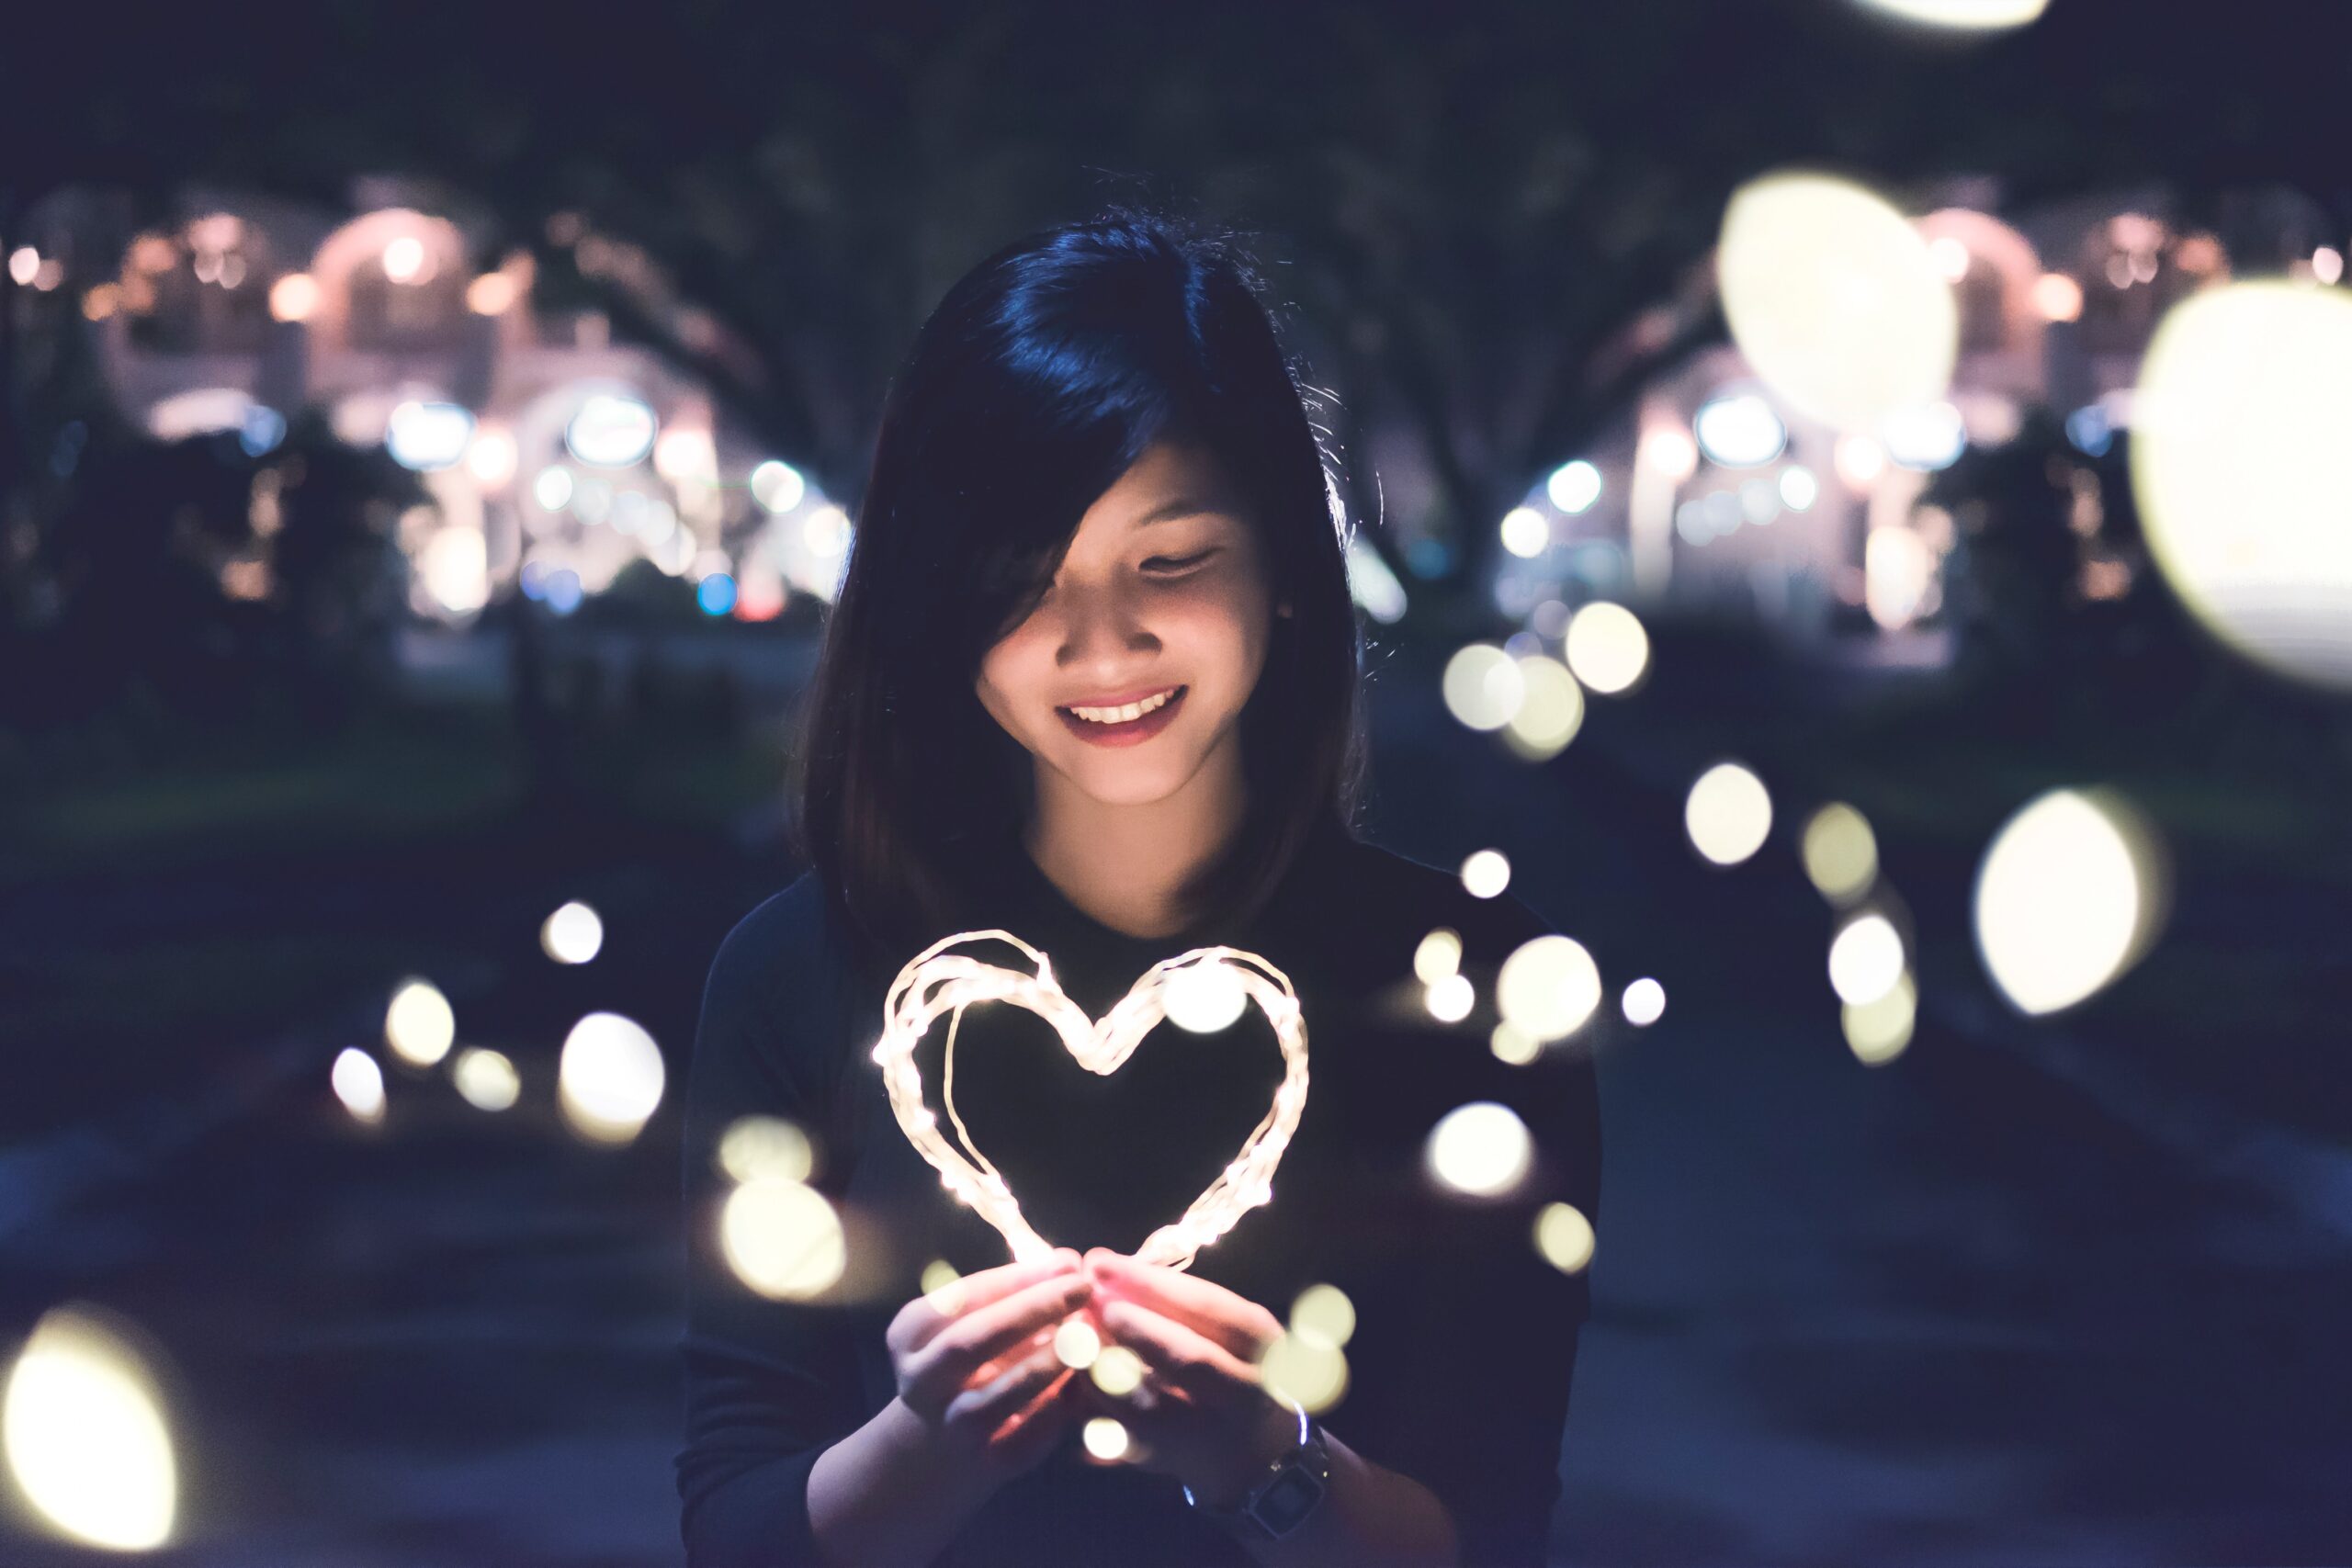 In an article about asian brides a woman holding a heart shaped light.